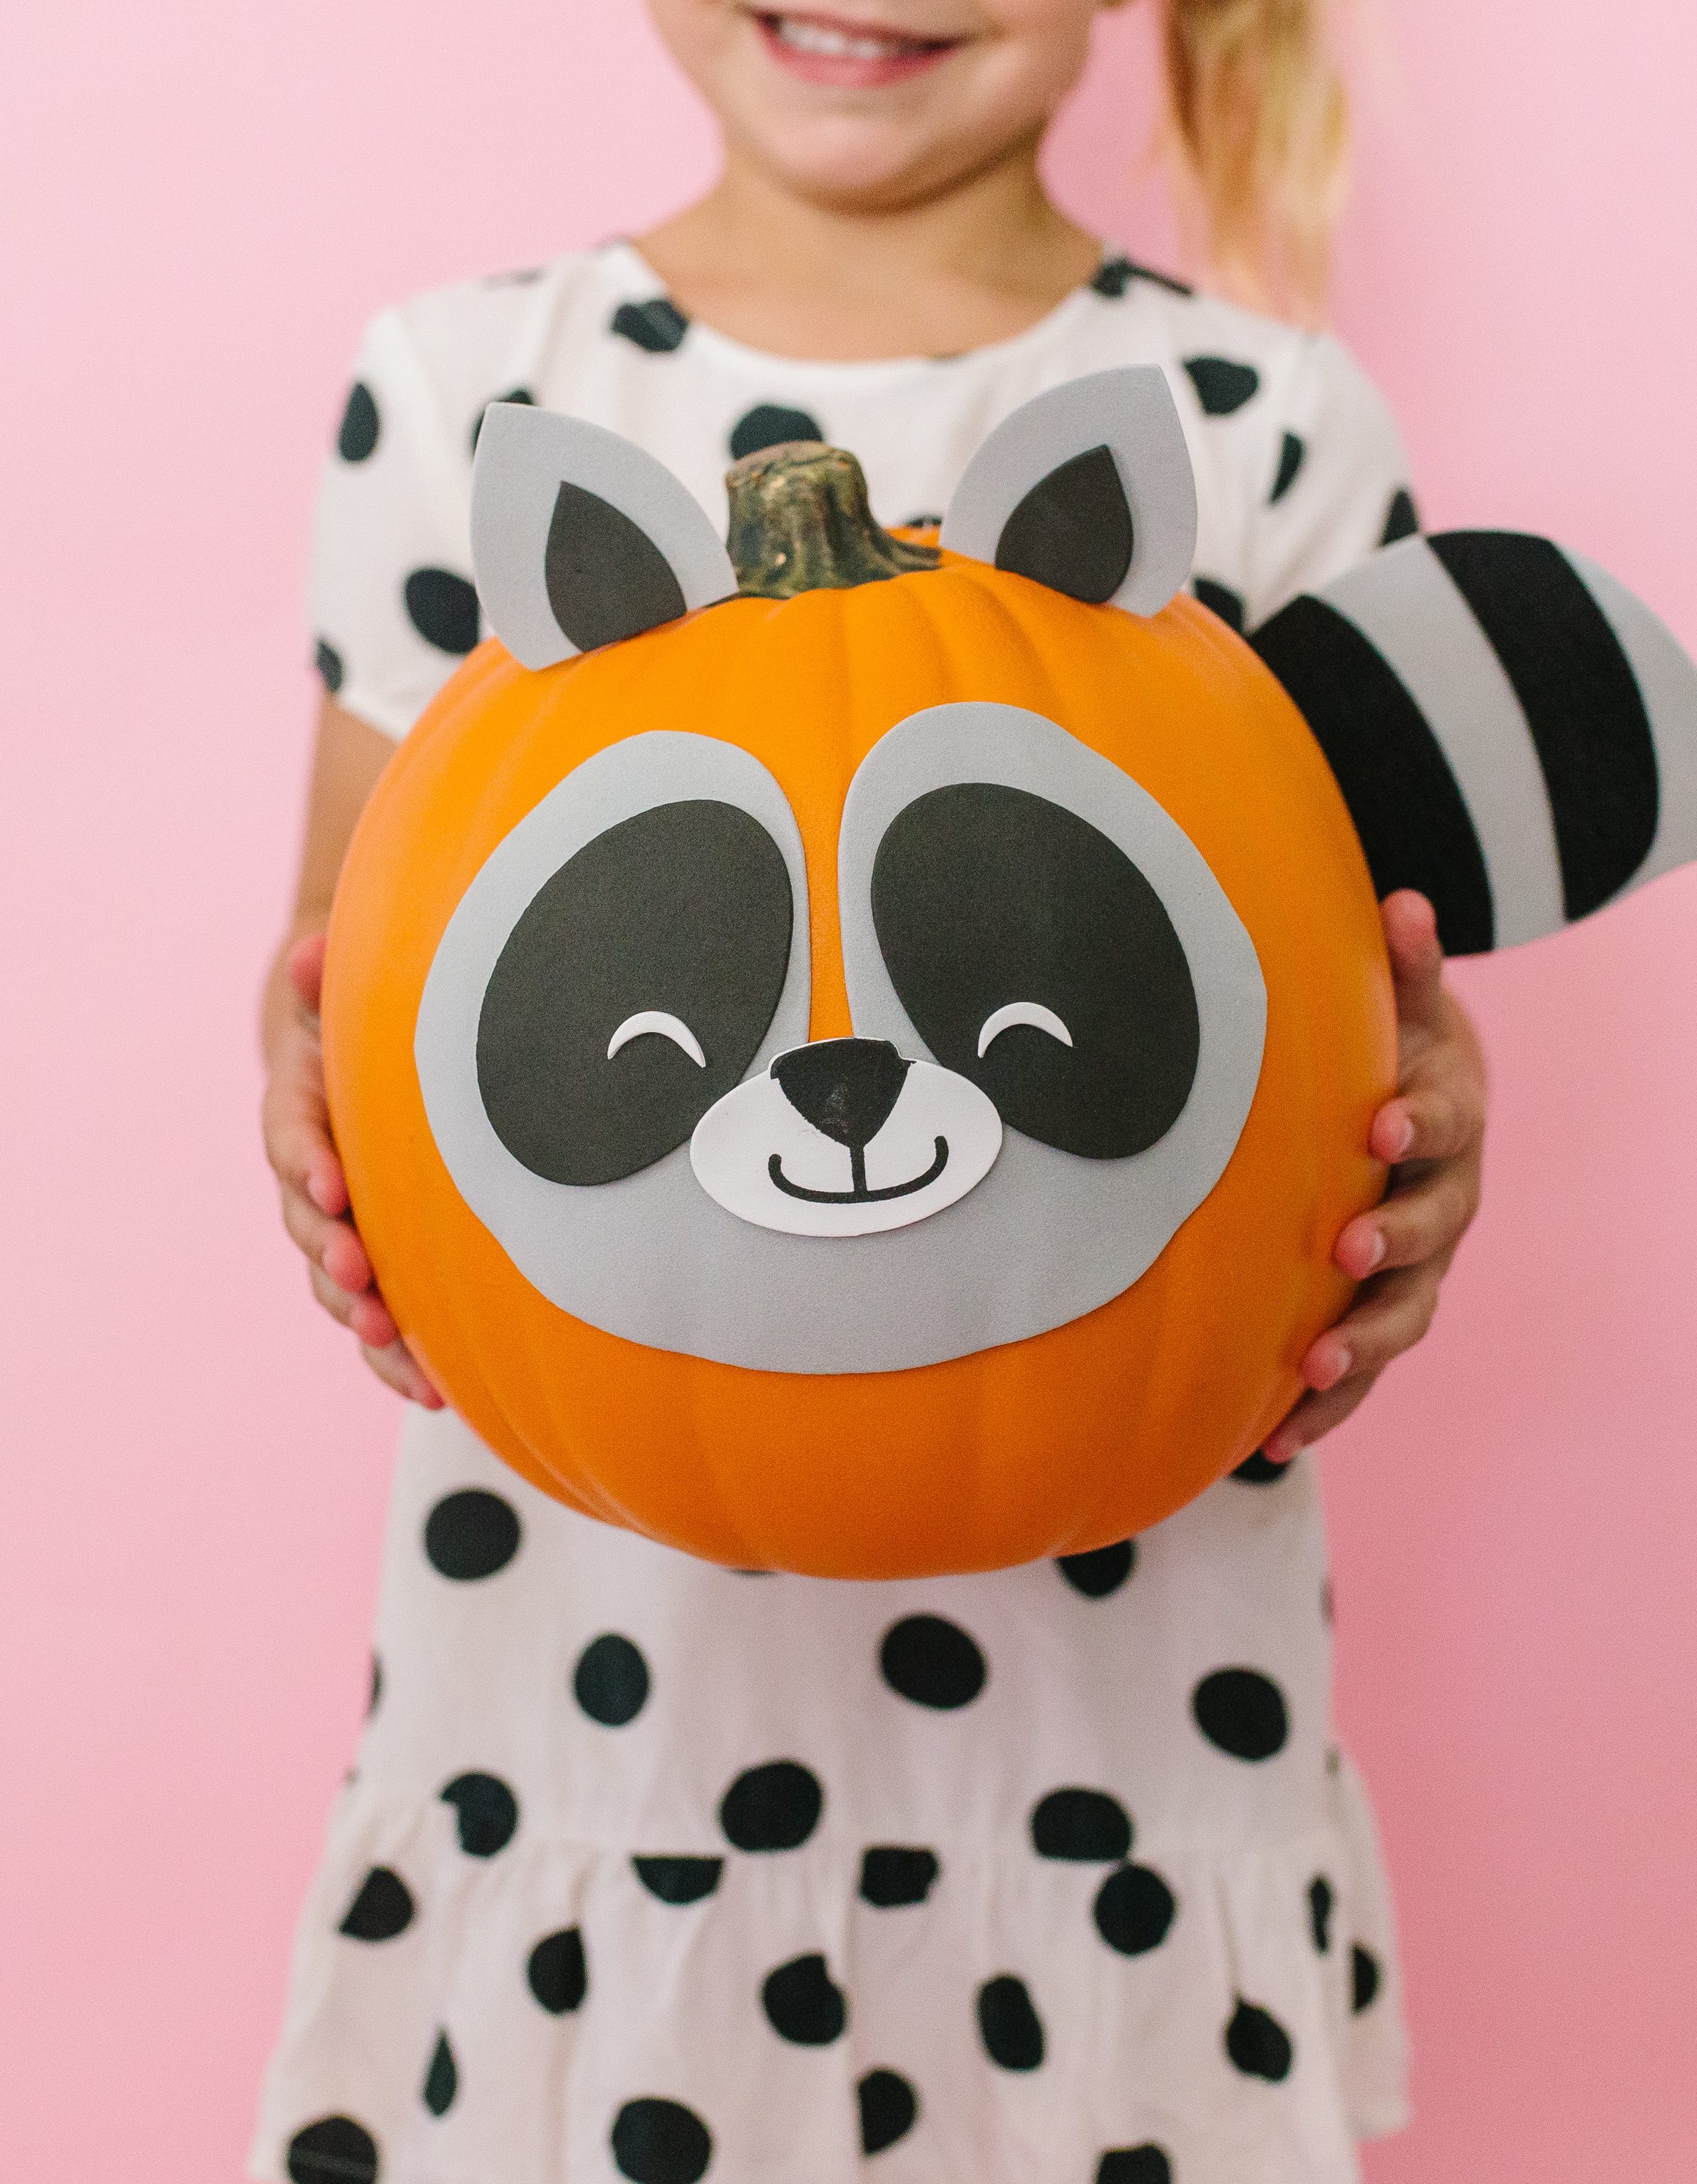 Halloween Crafts: 7 Easy No Carve Pumpkin Ideas + a tutorial featured by Top US Craft Blog + The Pretty Life Girls: Woodland Creature Pumpkins